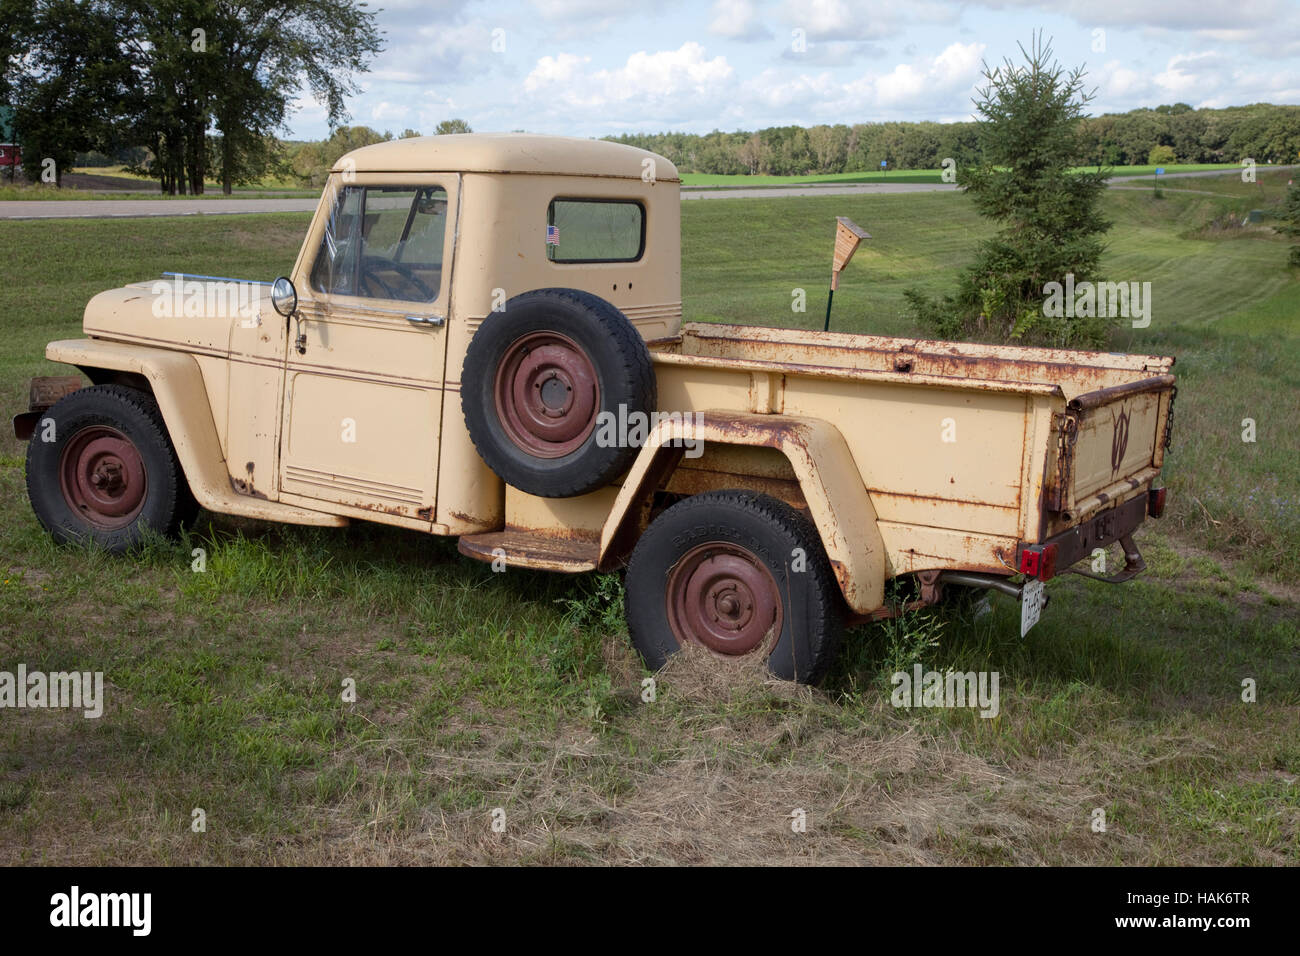 Old vintage Willys Jeep Pickup Truck for sale at Pixie Woods Sales Stock Photo: 127041623 - Alamy